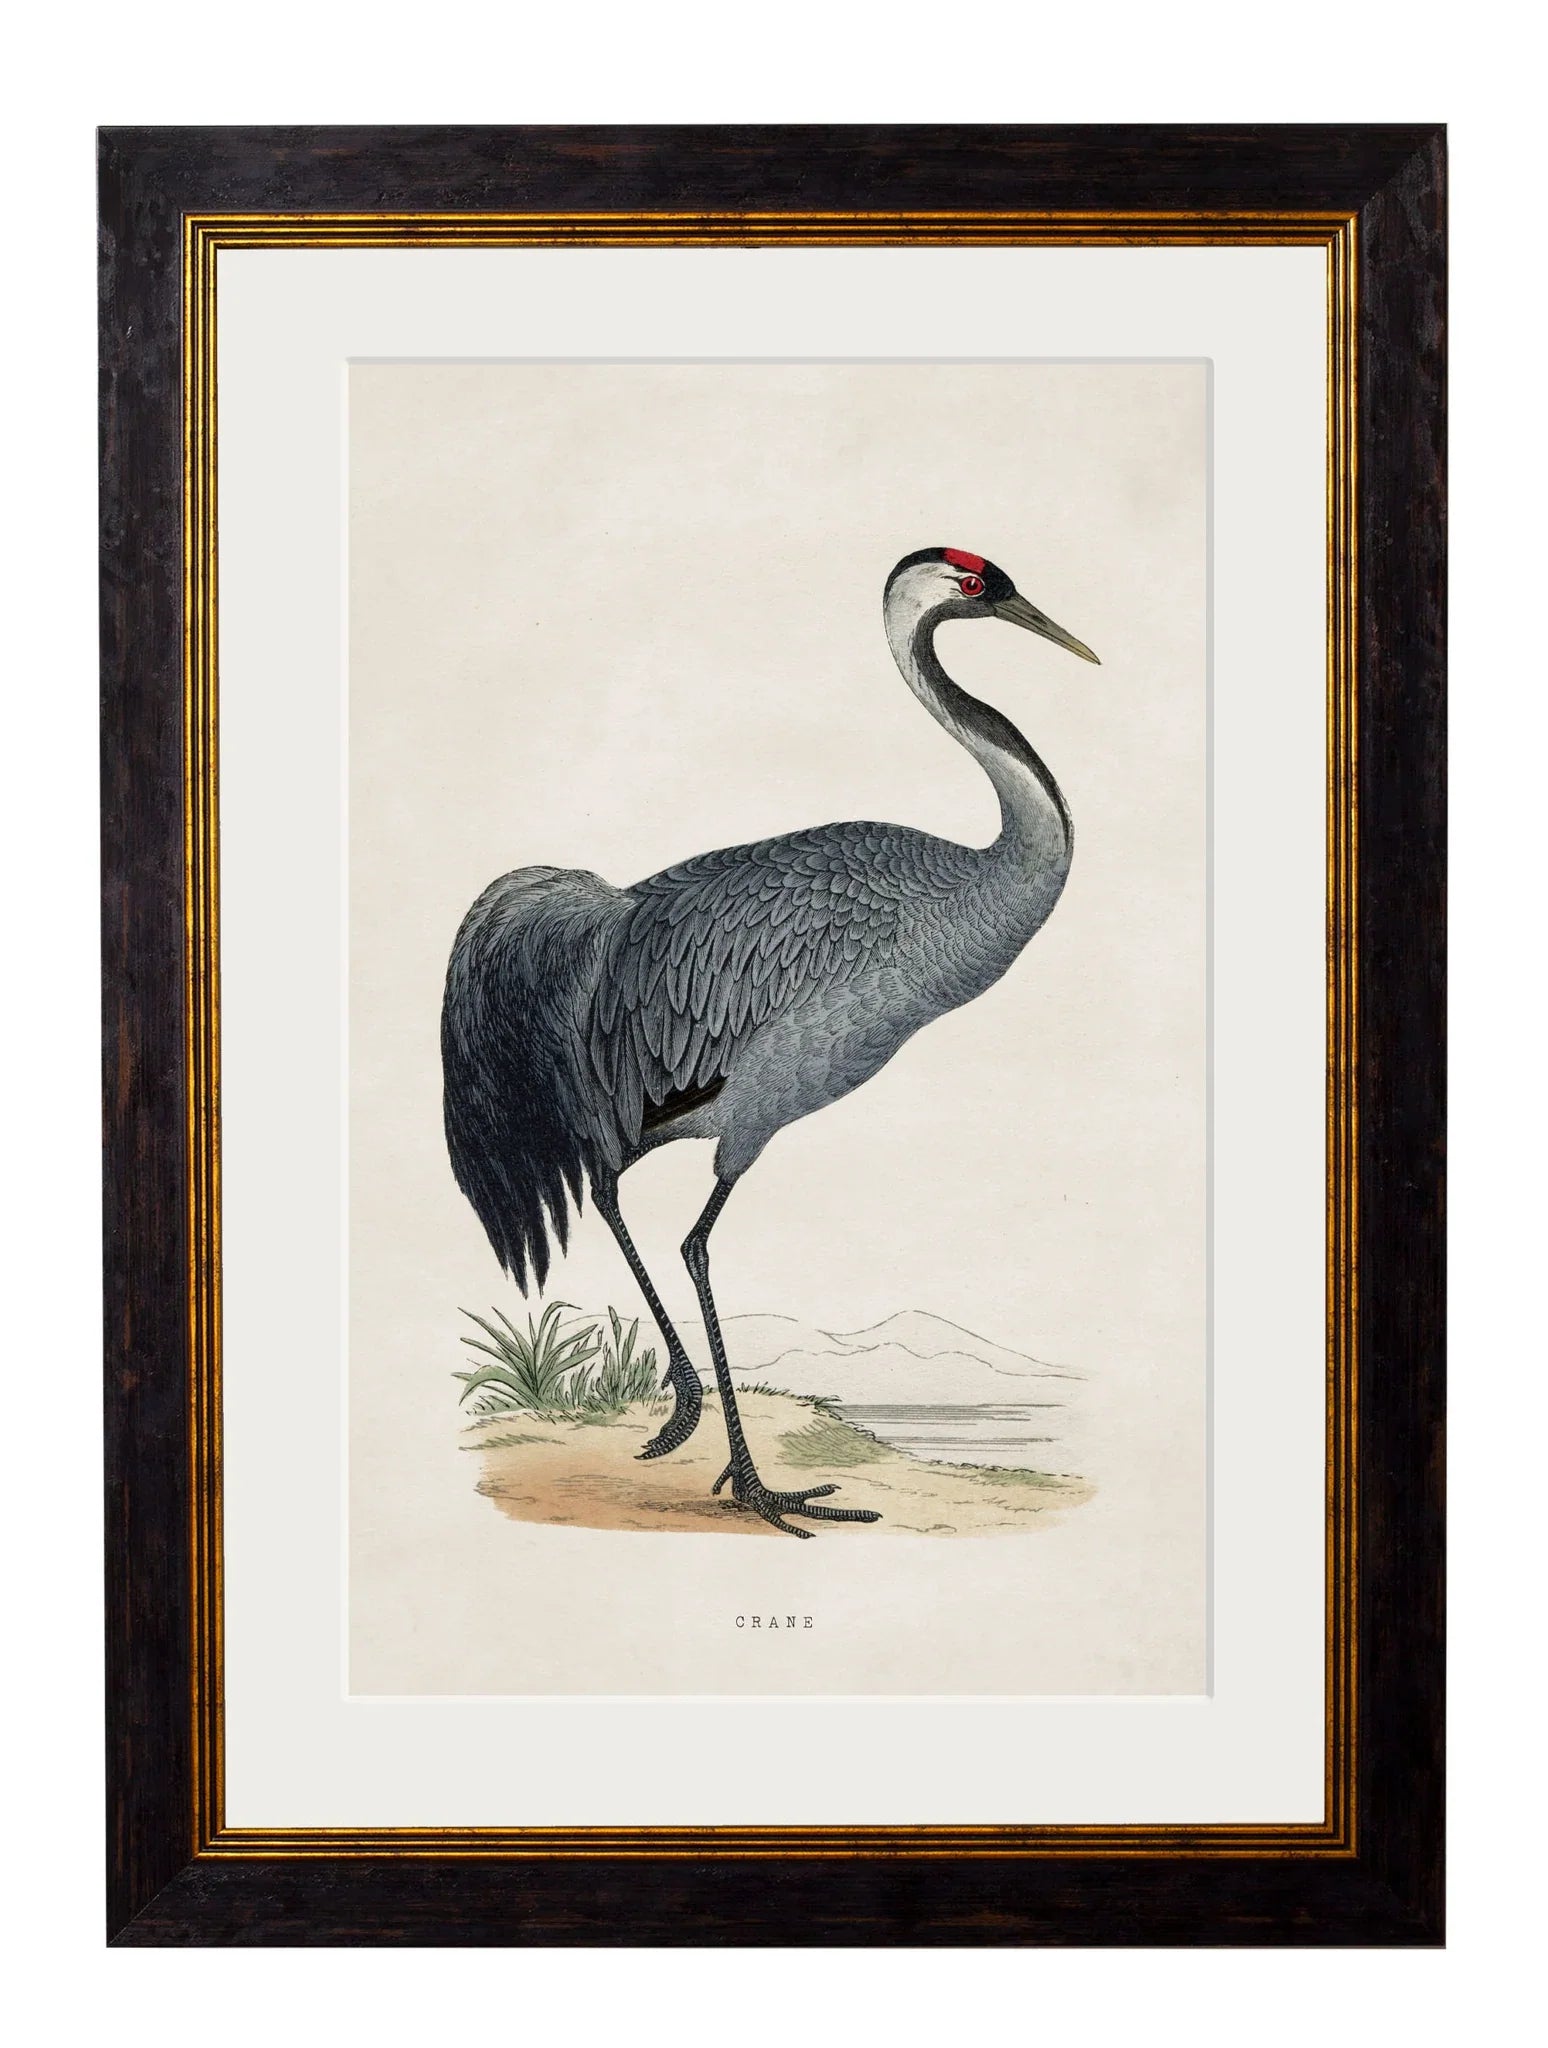 C.1850's British Wading Birds Frames for sale - Woodcock and Cavendish